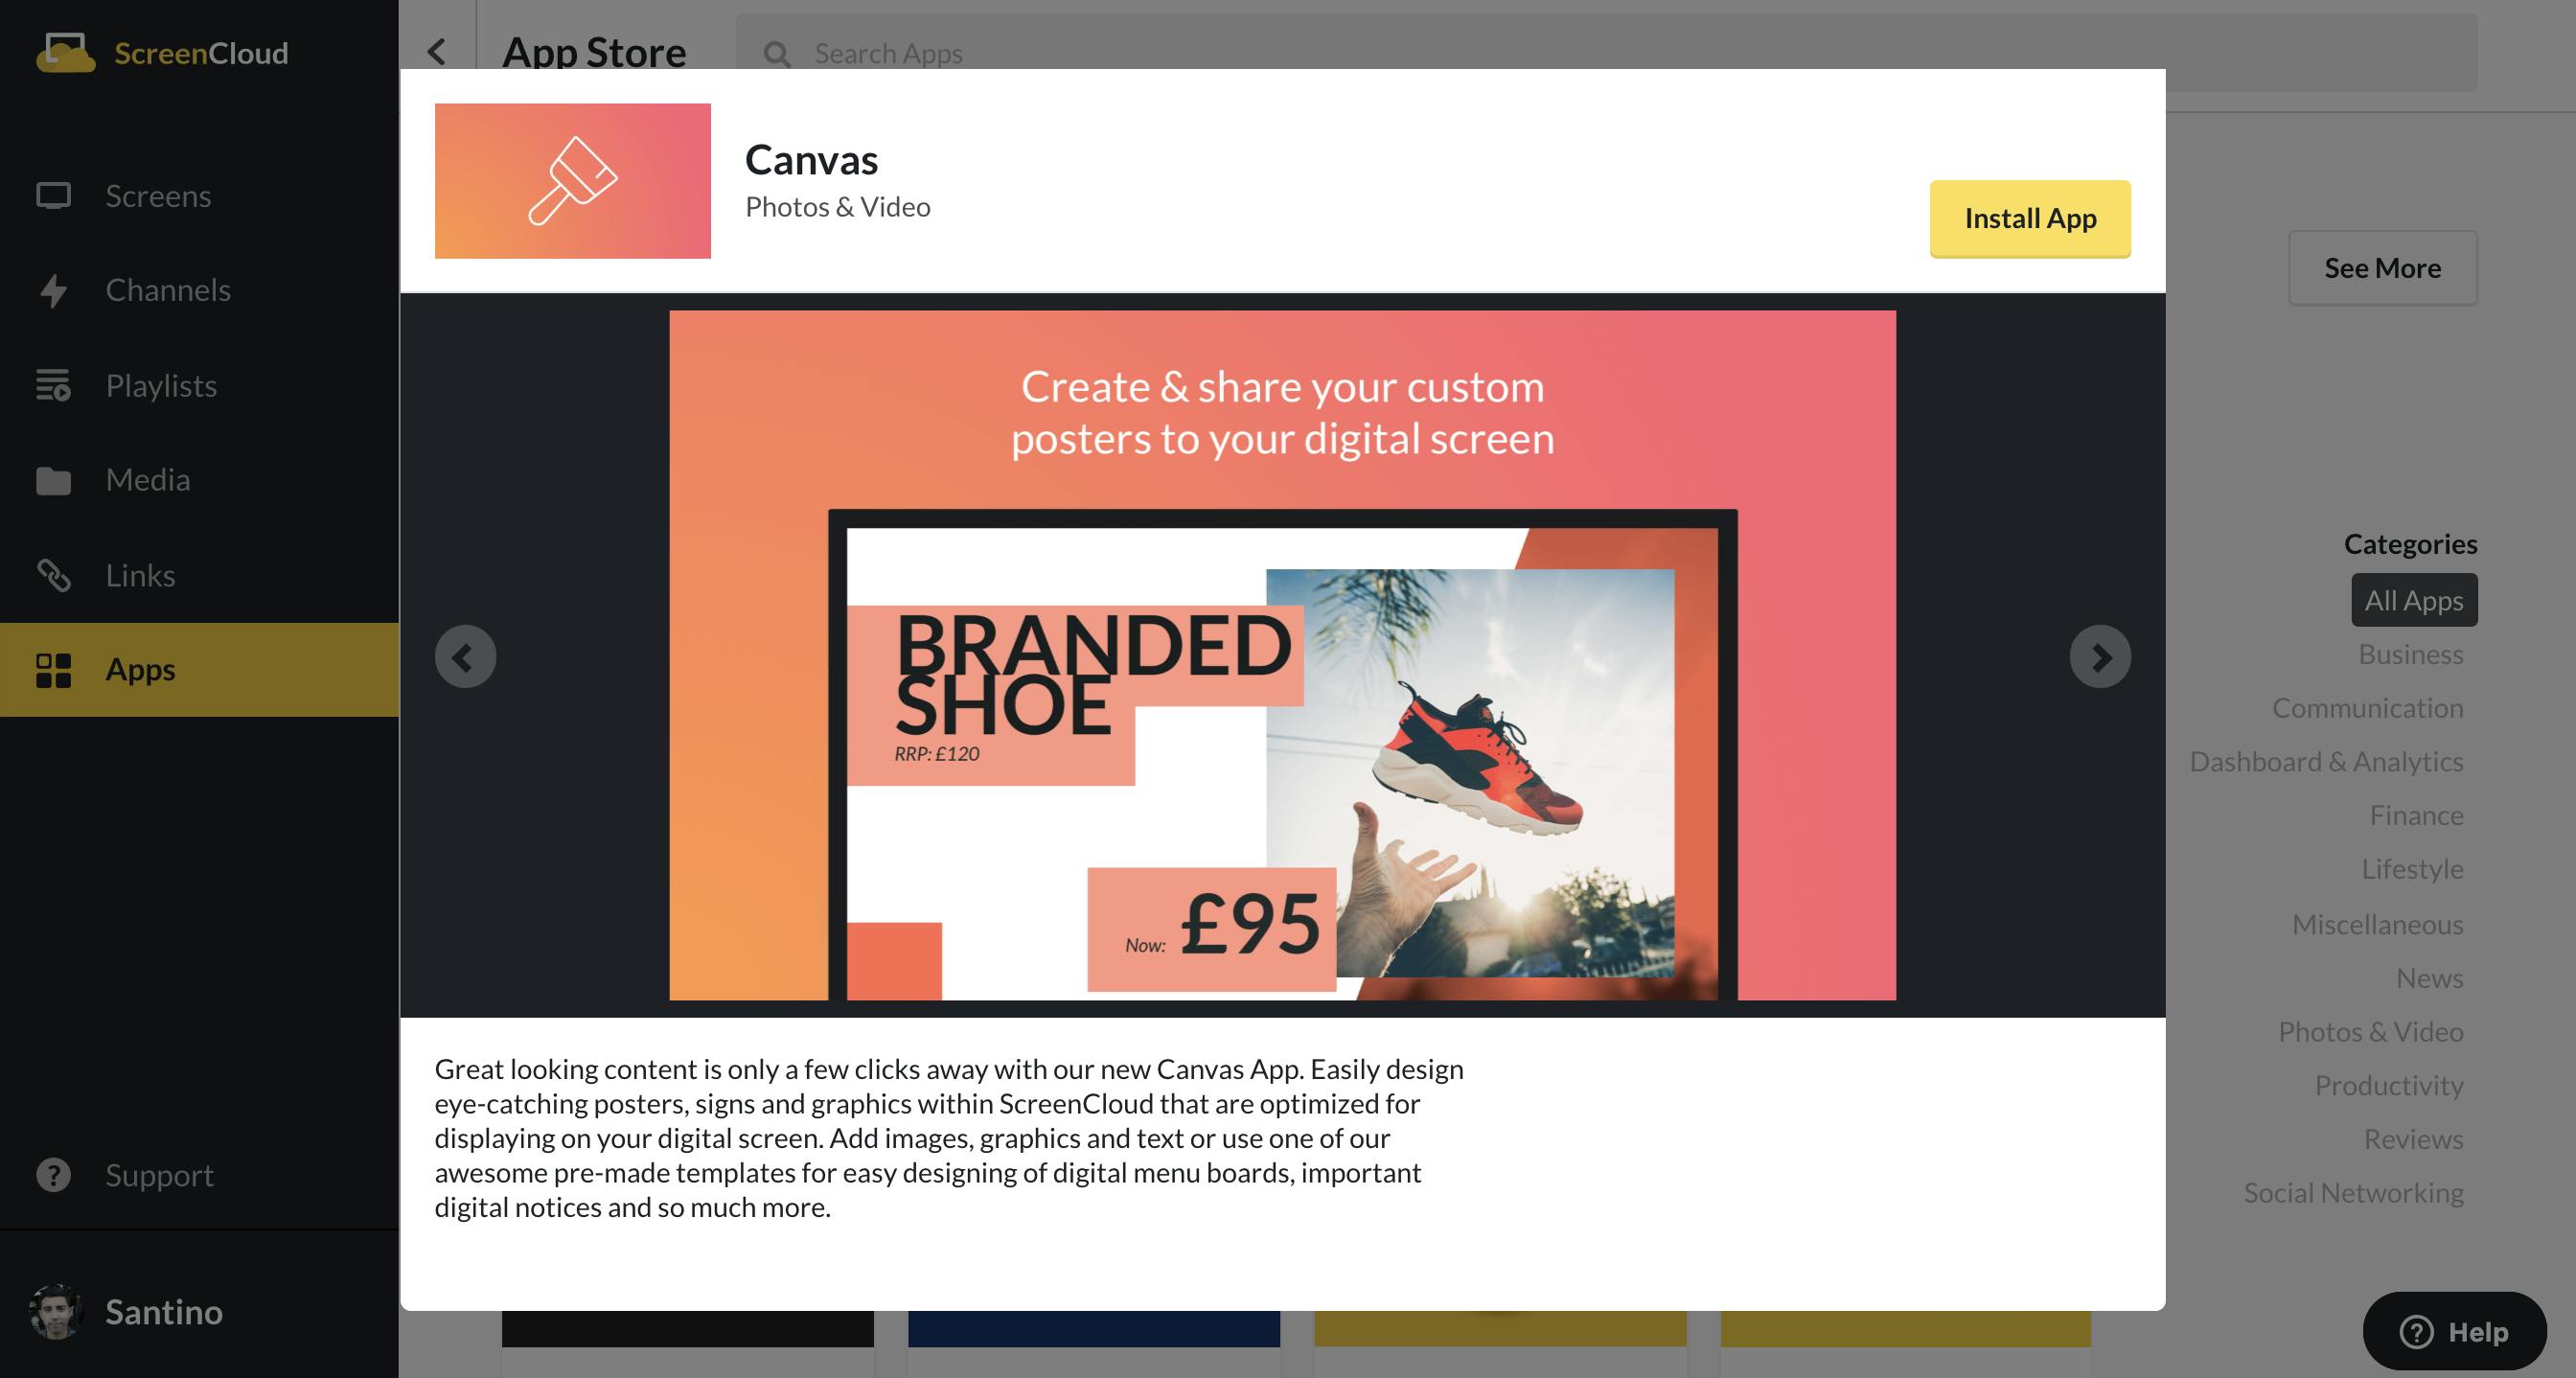 Canvas app guide - install app 1.27.2020.png
